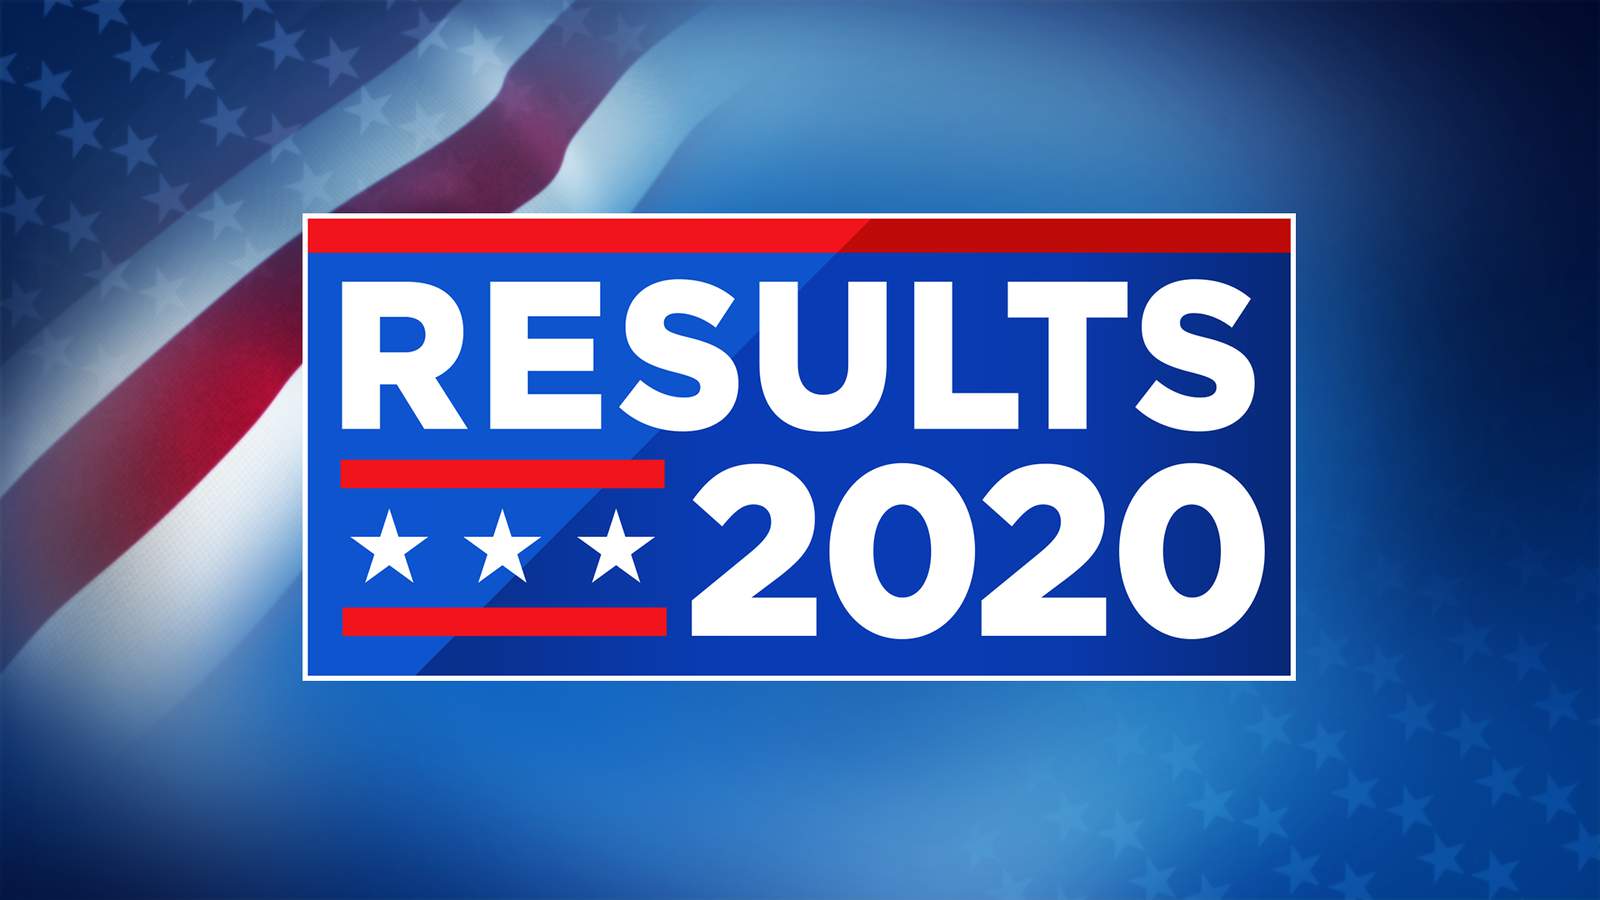 Florida General Election Results for Brevard County on Nov. 3, 2020